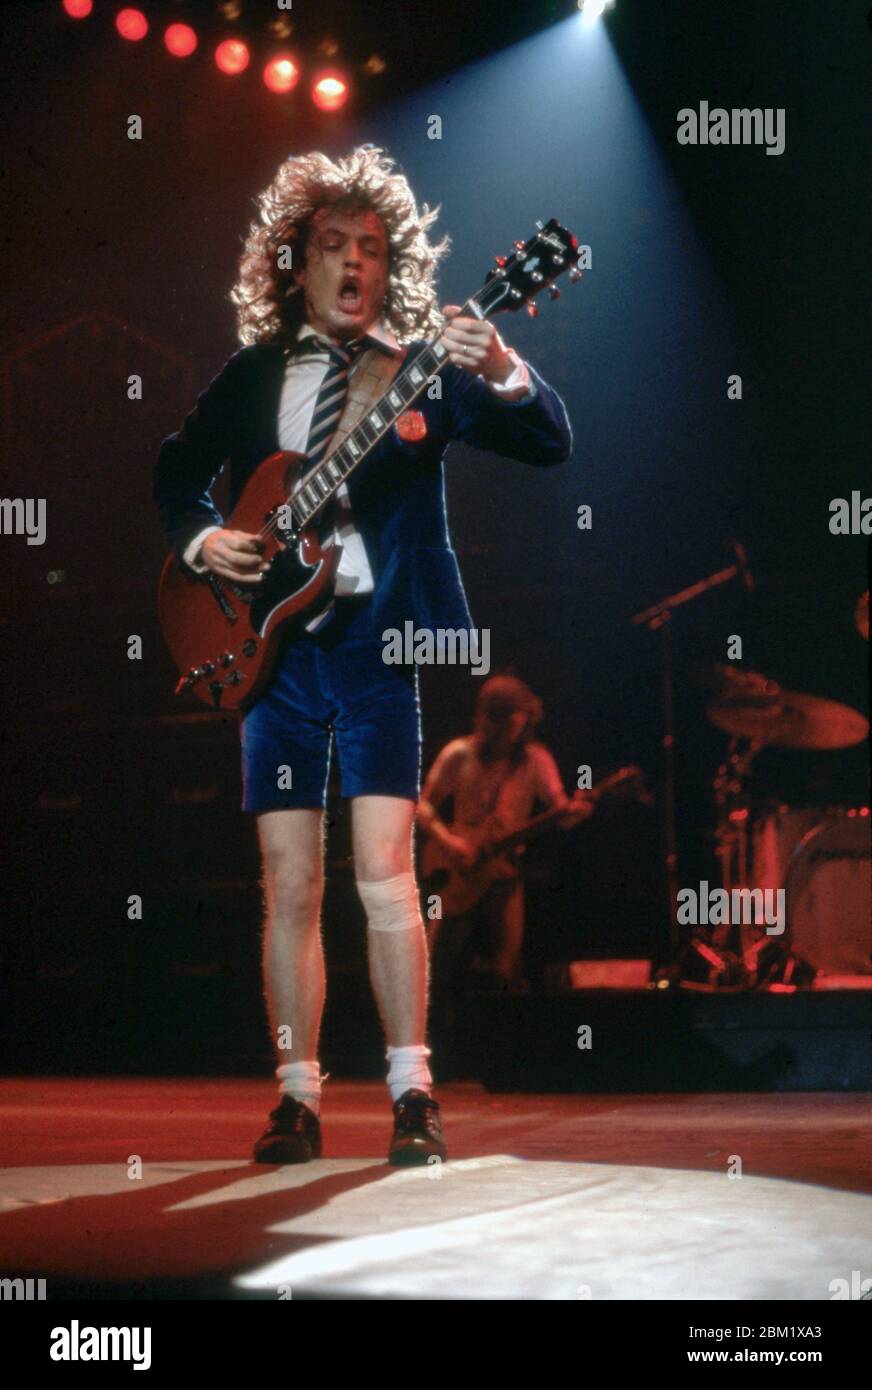 DETROIT - NOVEMBER 17: Angus Young, lead guitarist for AC/DC, wearing his iconic British schoolboy uniform and playing his red Gibson SG, performs during the Flick of the Switch/Monsters of Rock tour, on November 17, 1983, in Detroit, Michigan. (Photo by Ross Marino/Rock Negatives) Stock Photo